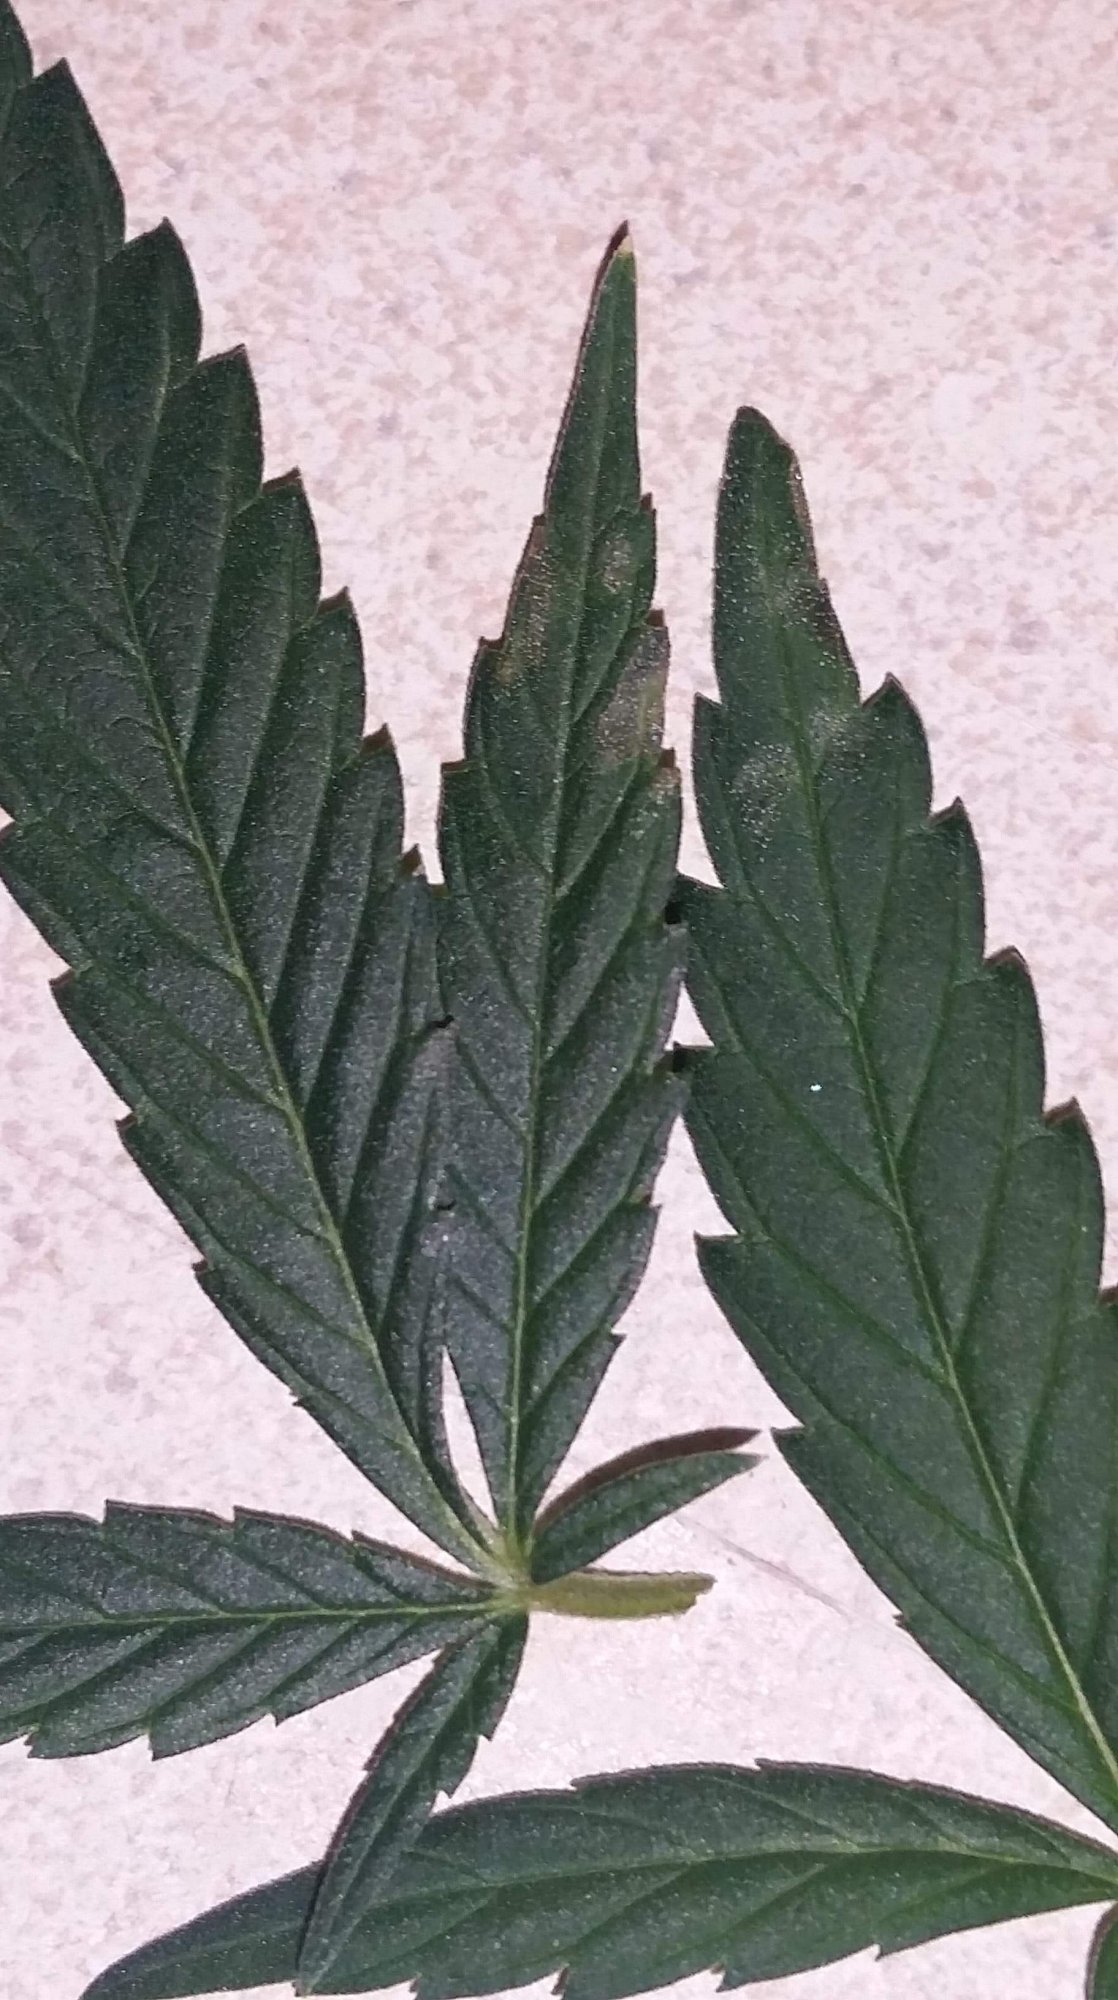 What is this deficiency toxicity or other 2